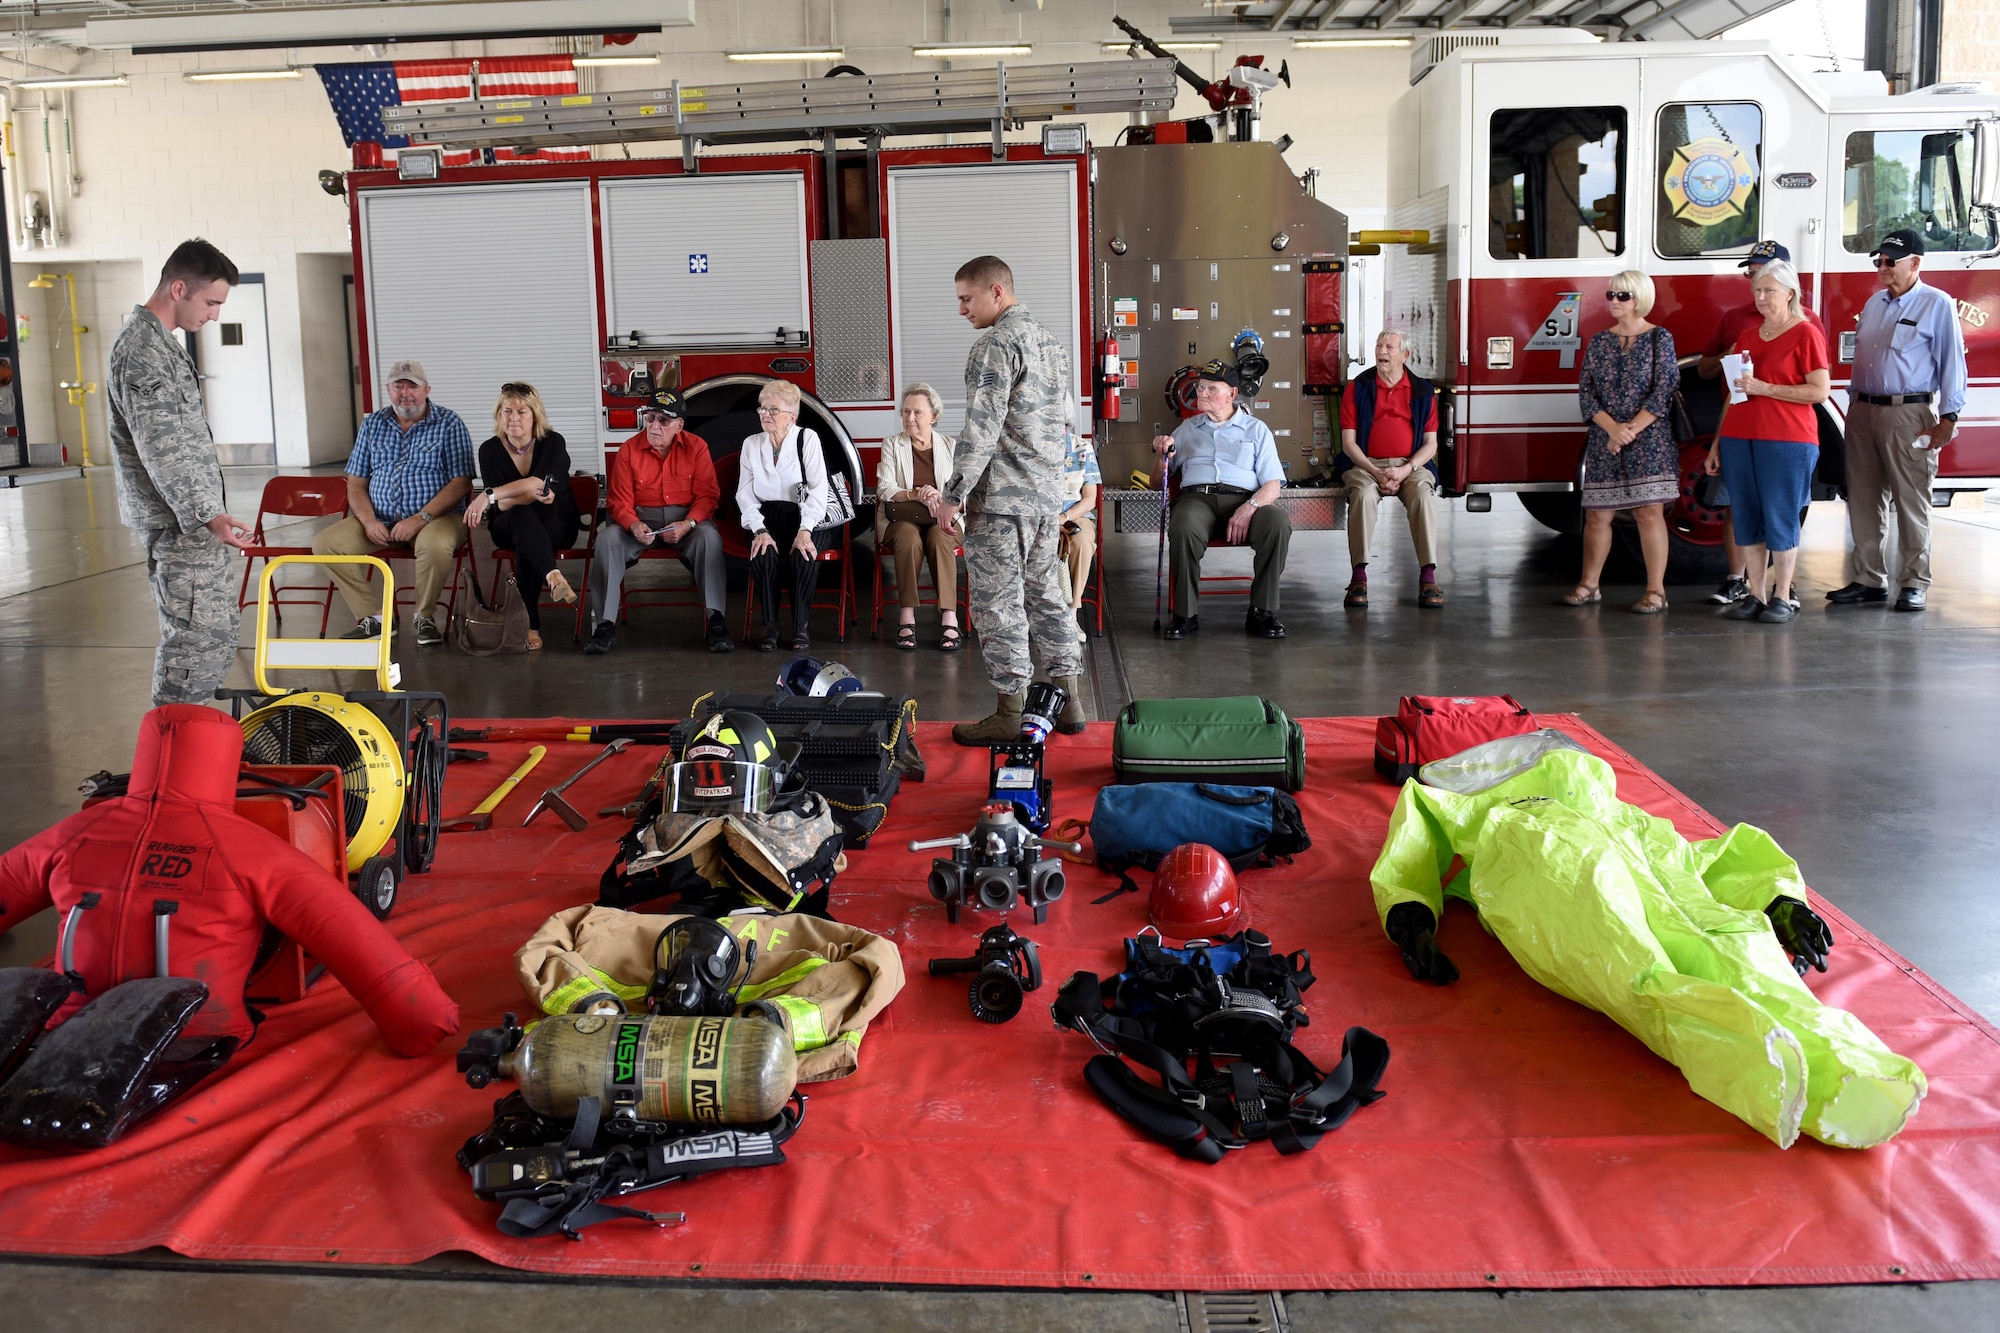 Members of the 4th Civil Engineering Squadron fire department present and explain the different pieces of equipment throughout a fire department, during the 4th Fighter Wing 75th Anniversary Tour, Sept. 15,2017, at Seymour Johnson Air Force Base, North Carolina. The tour also consisted of a readiness stop, which allowed spectators to experience the training the pilots go through when preparing to conduct overseas contingency operations through a simulator. (U.S. Air Force photo by Airman 1st Class Miranda A. Loera)